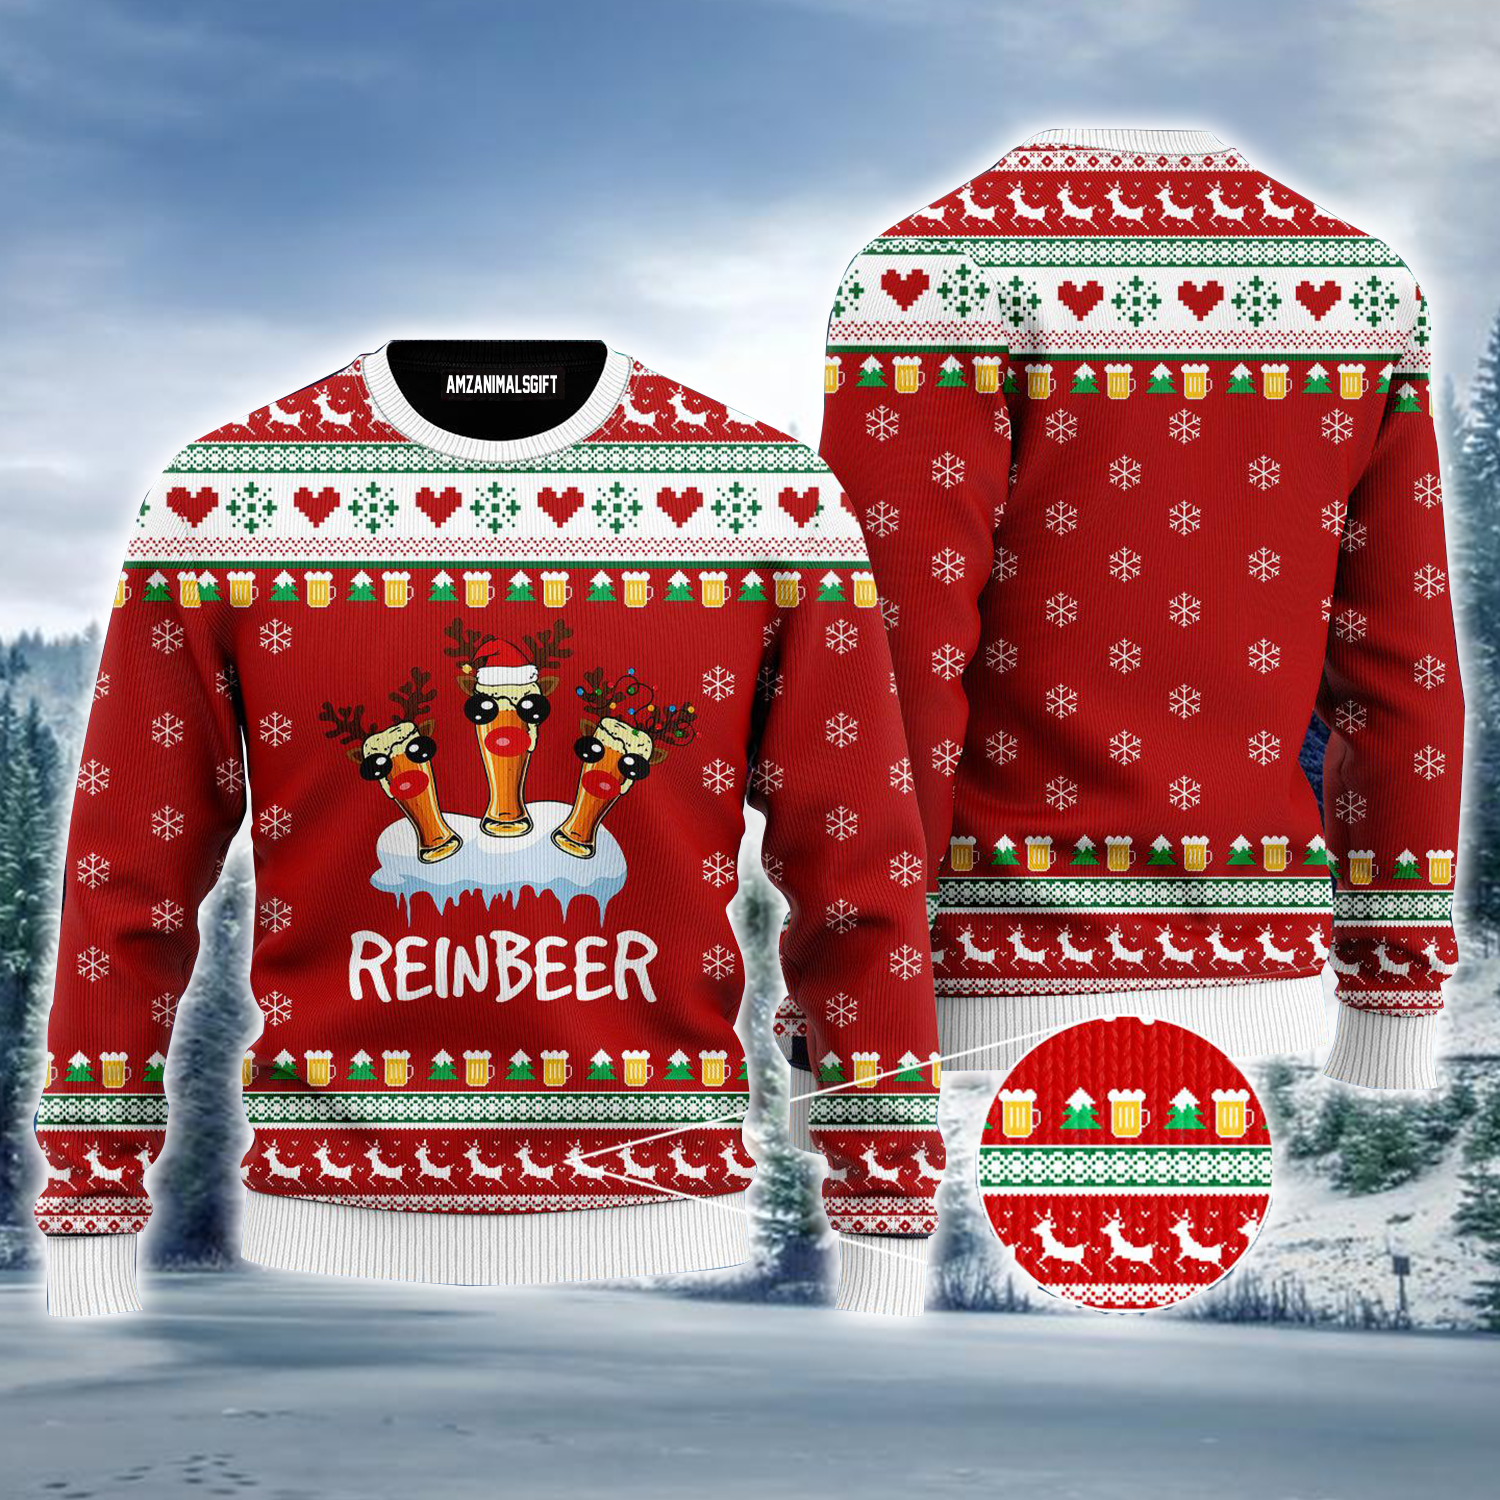 Reindeer Ugly Sweater, Funny Reindeer Reinbeer Christmas Red Ugly Sweater For Men & Women, Perfect Gift For Christmas, Friends, Family